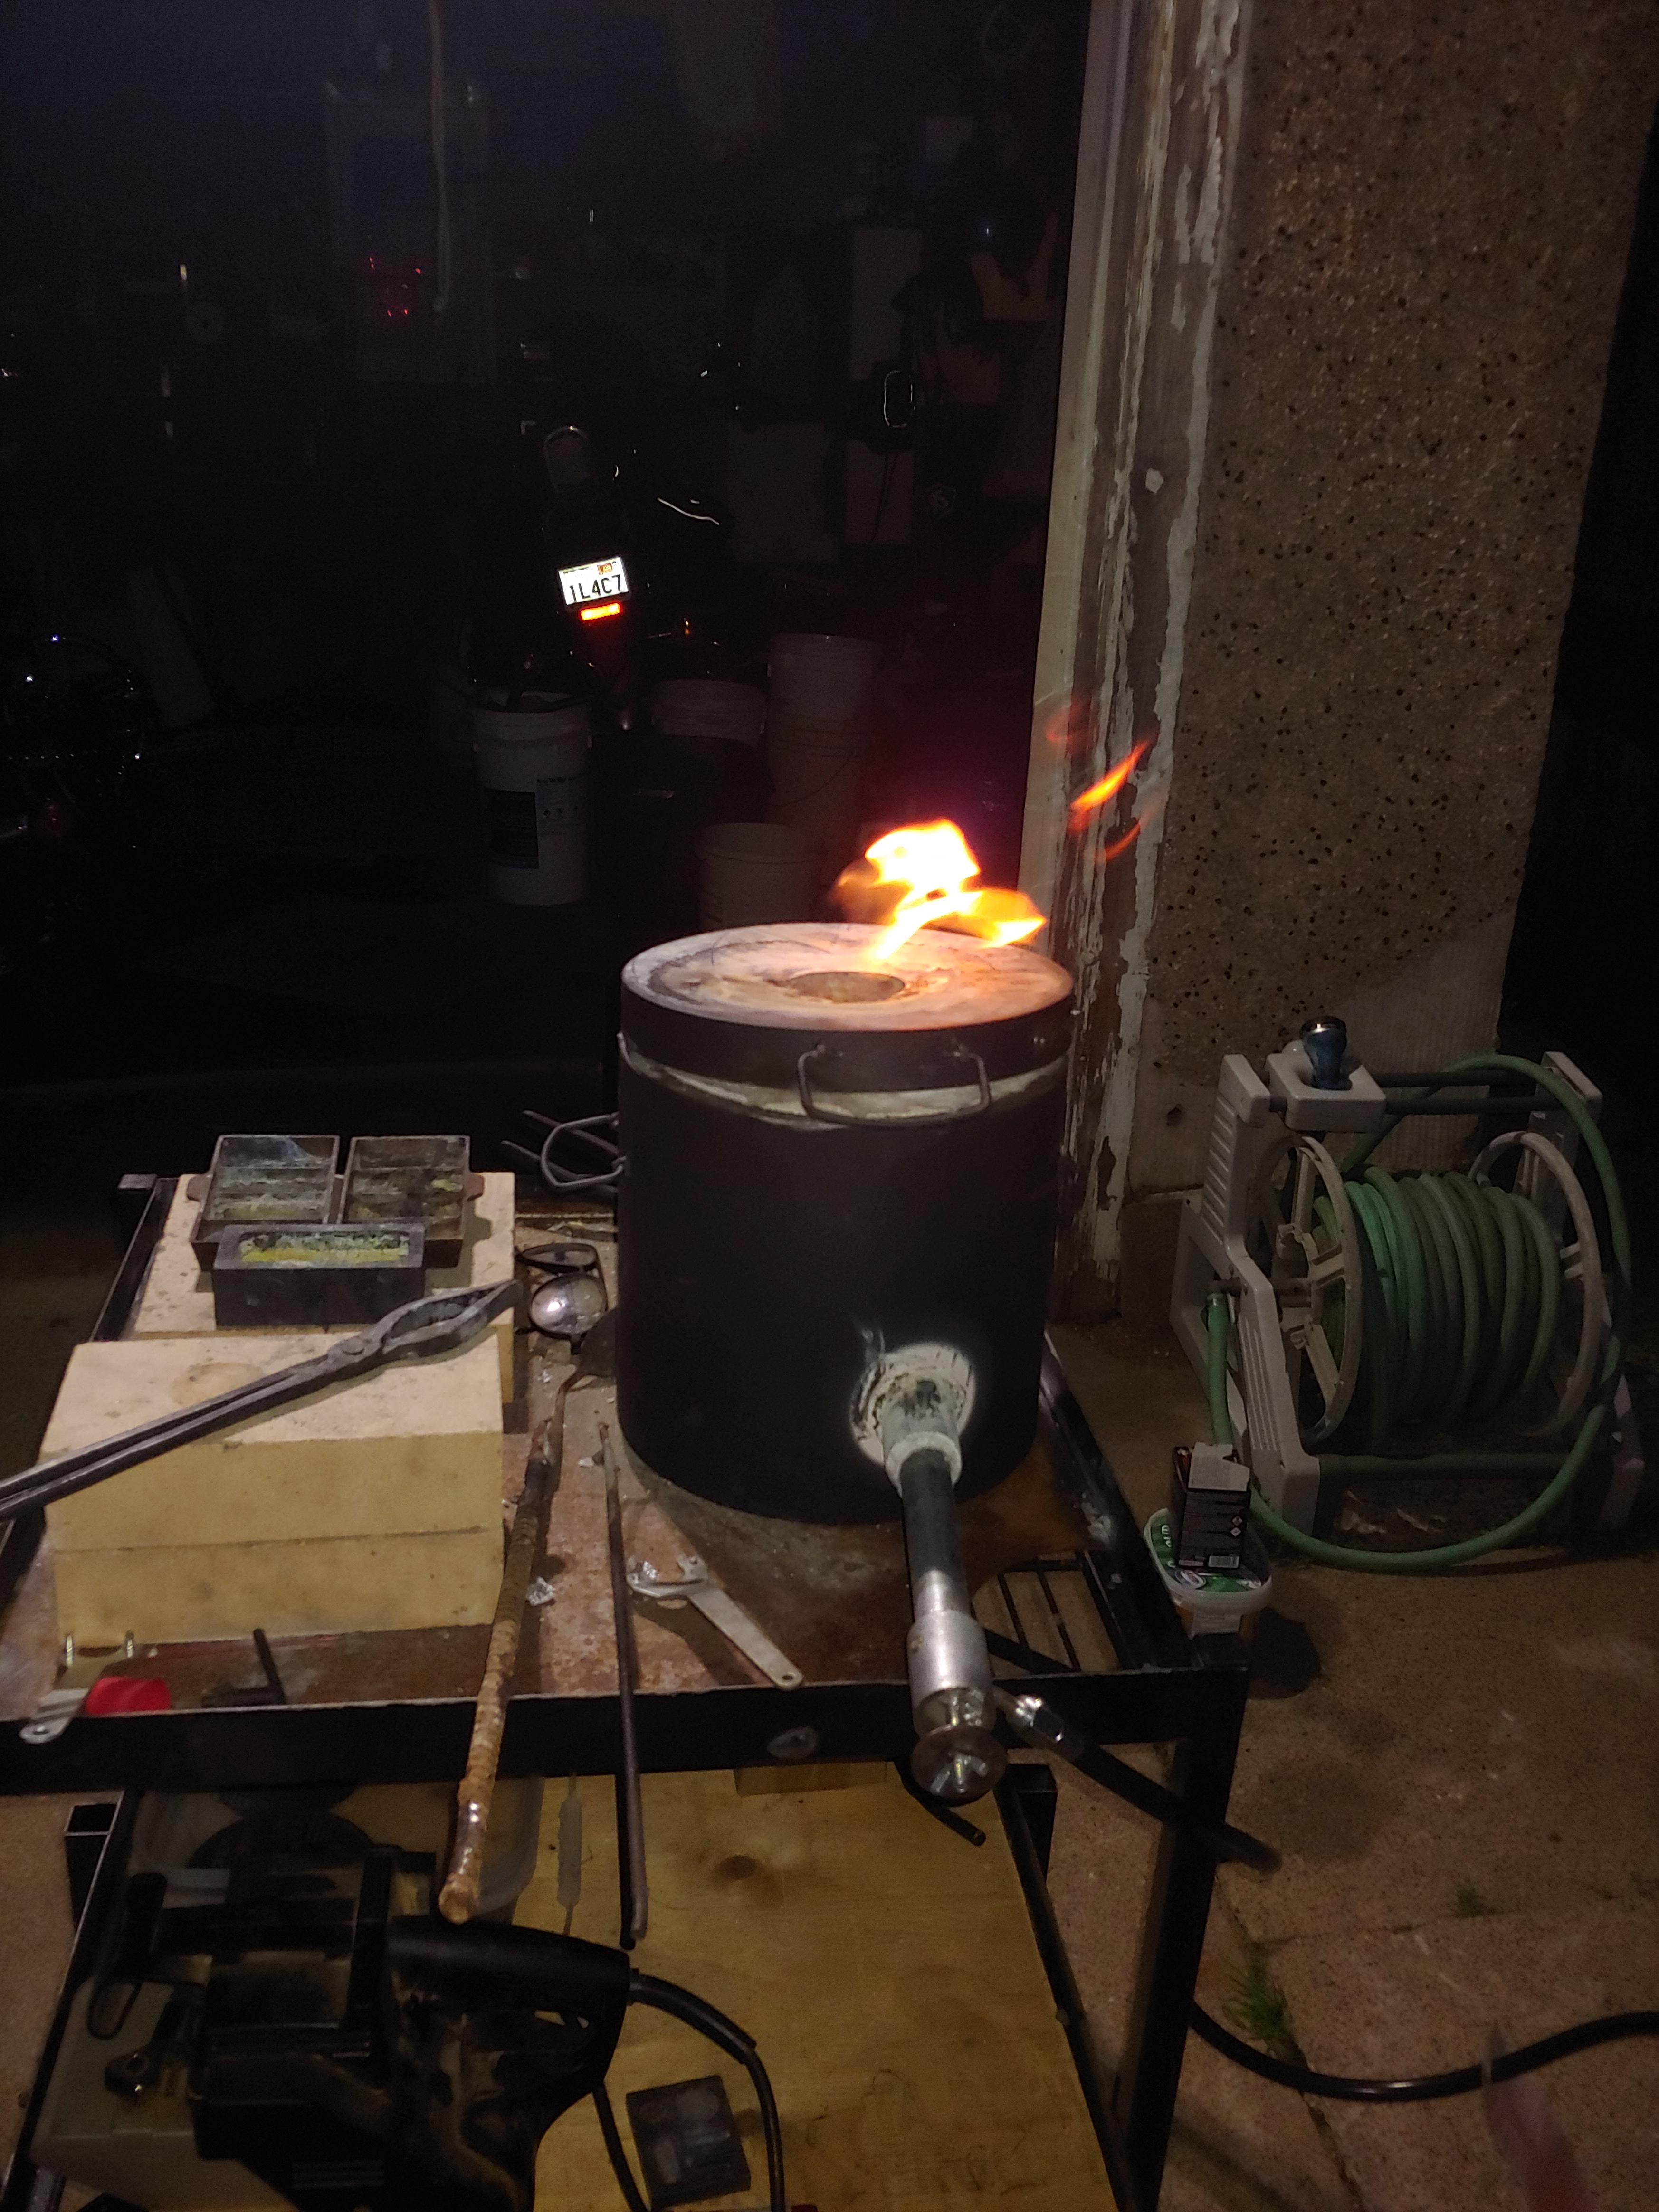 Trying Smelting For The First Time Using The TOAUTO Melting Furnace 